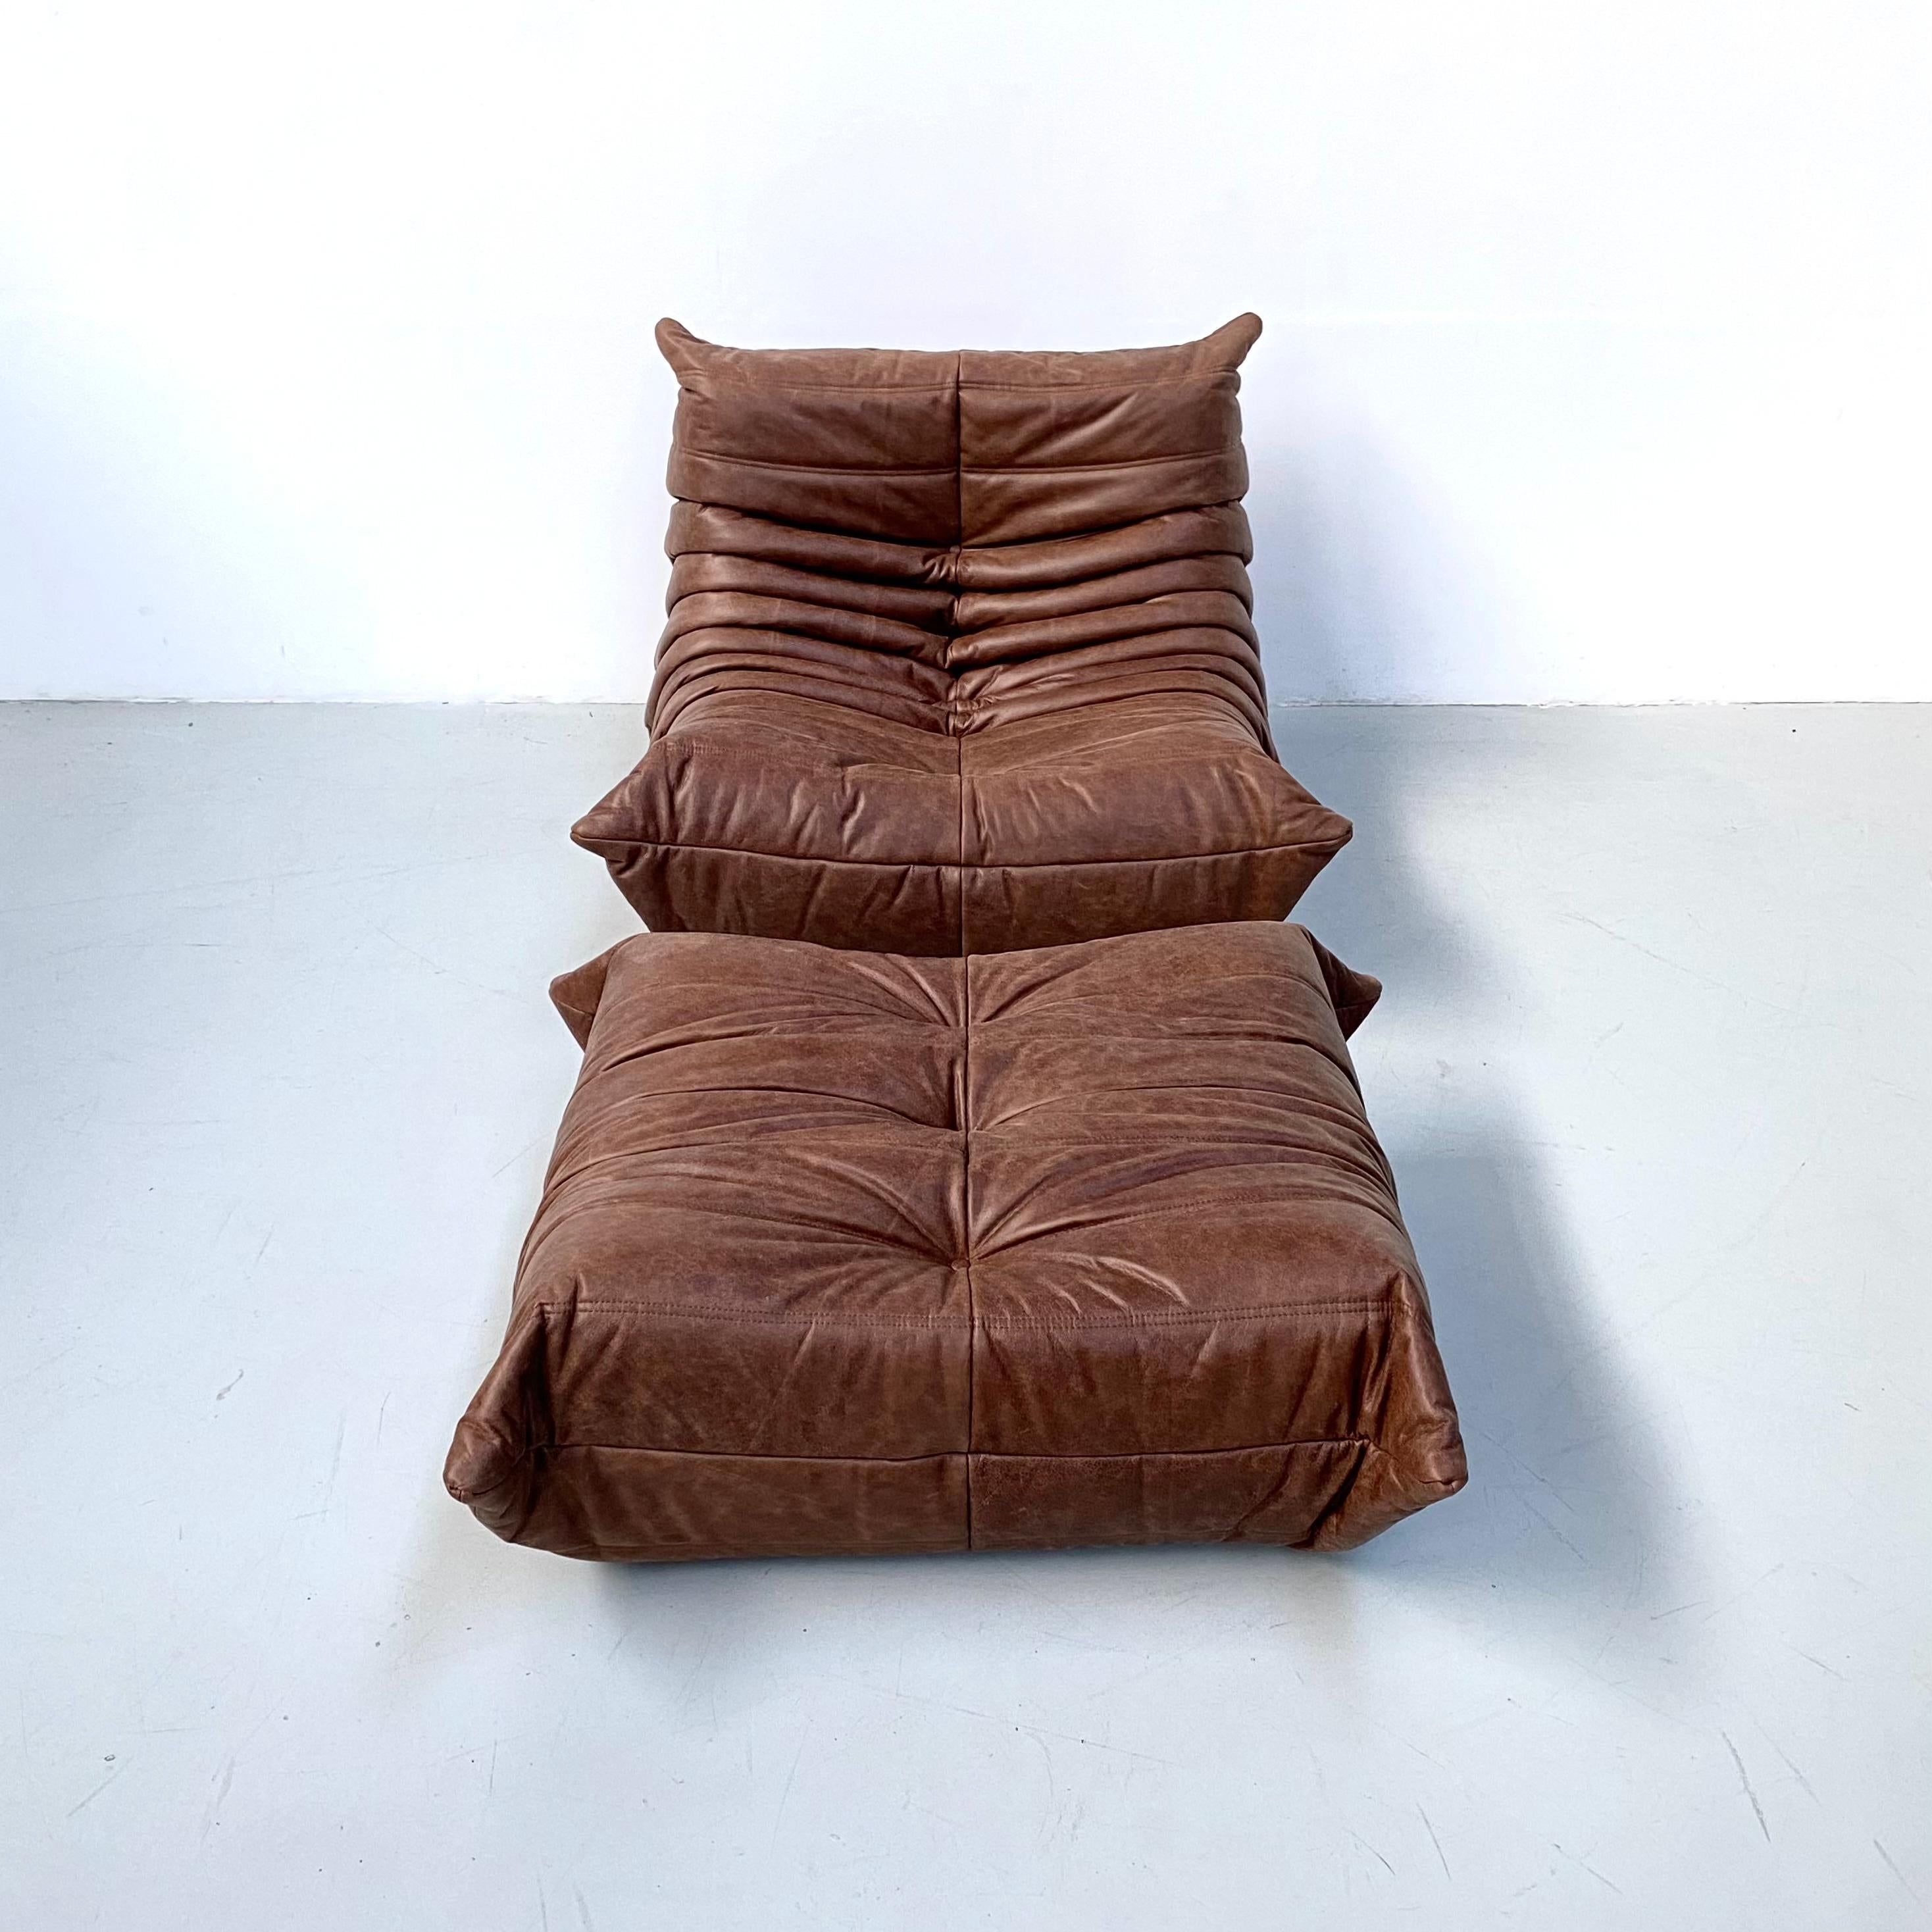 togo chair brown